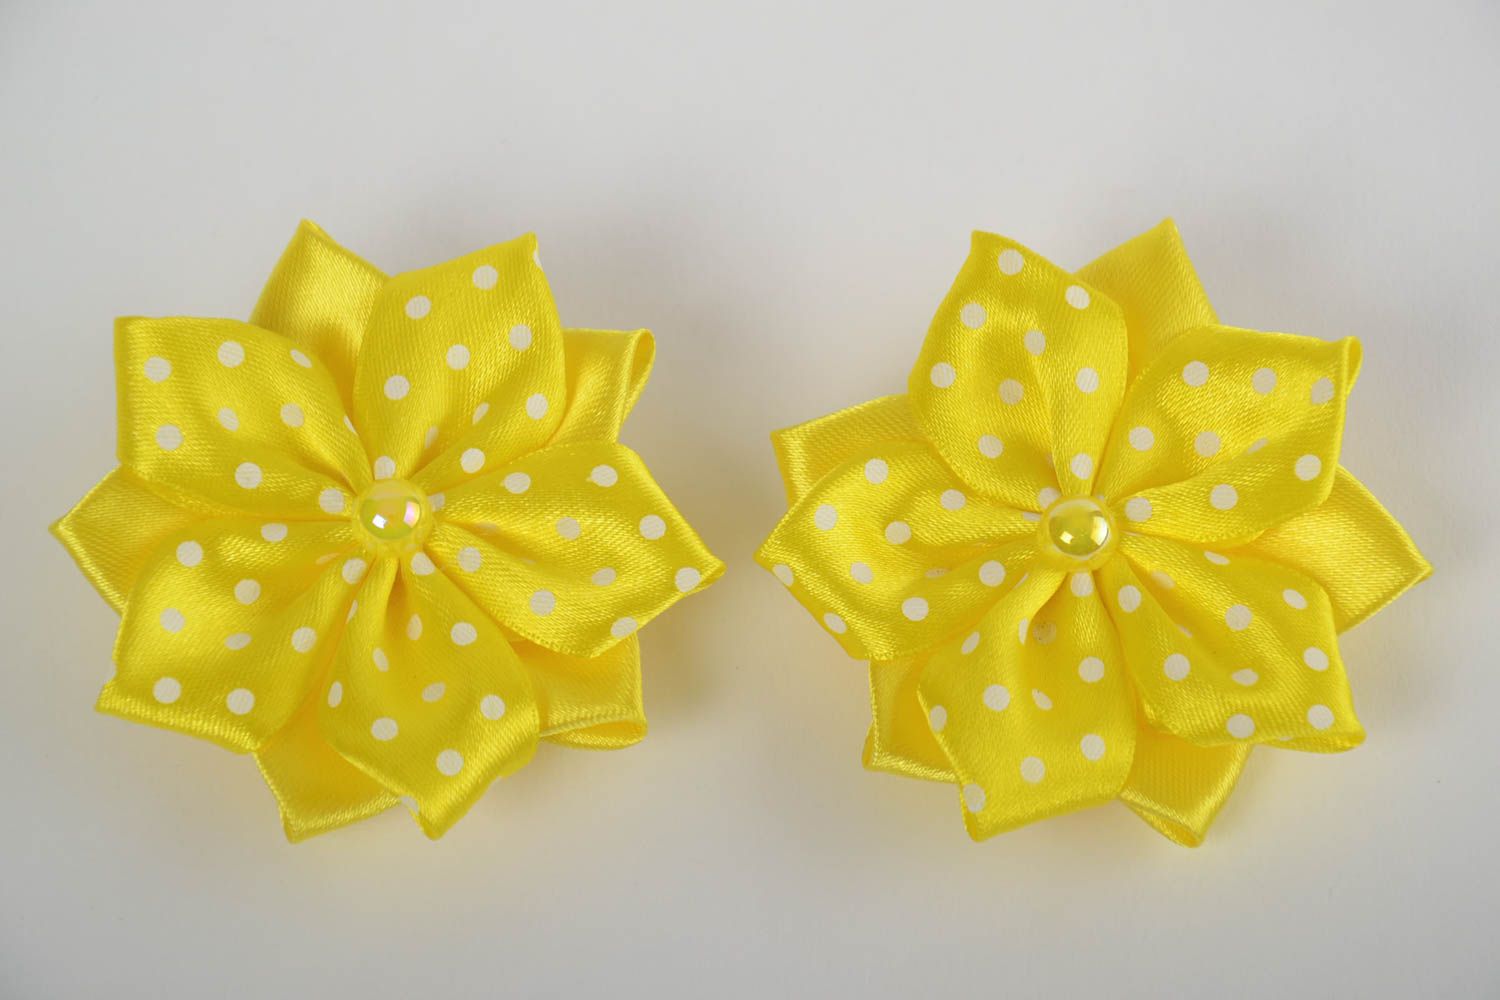 Handmade yellow hair clips with flowers made of satin ribbons for kids 2 pieces photo 2